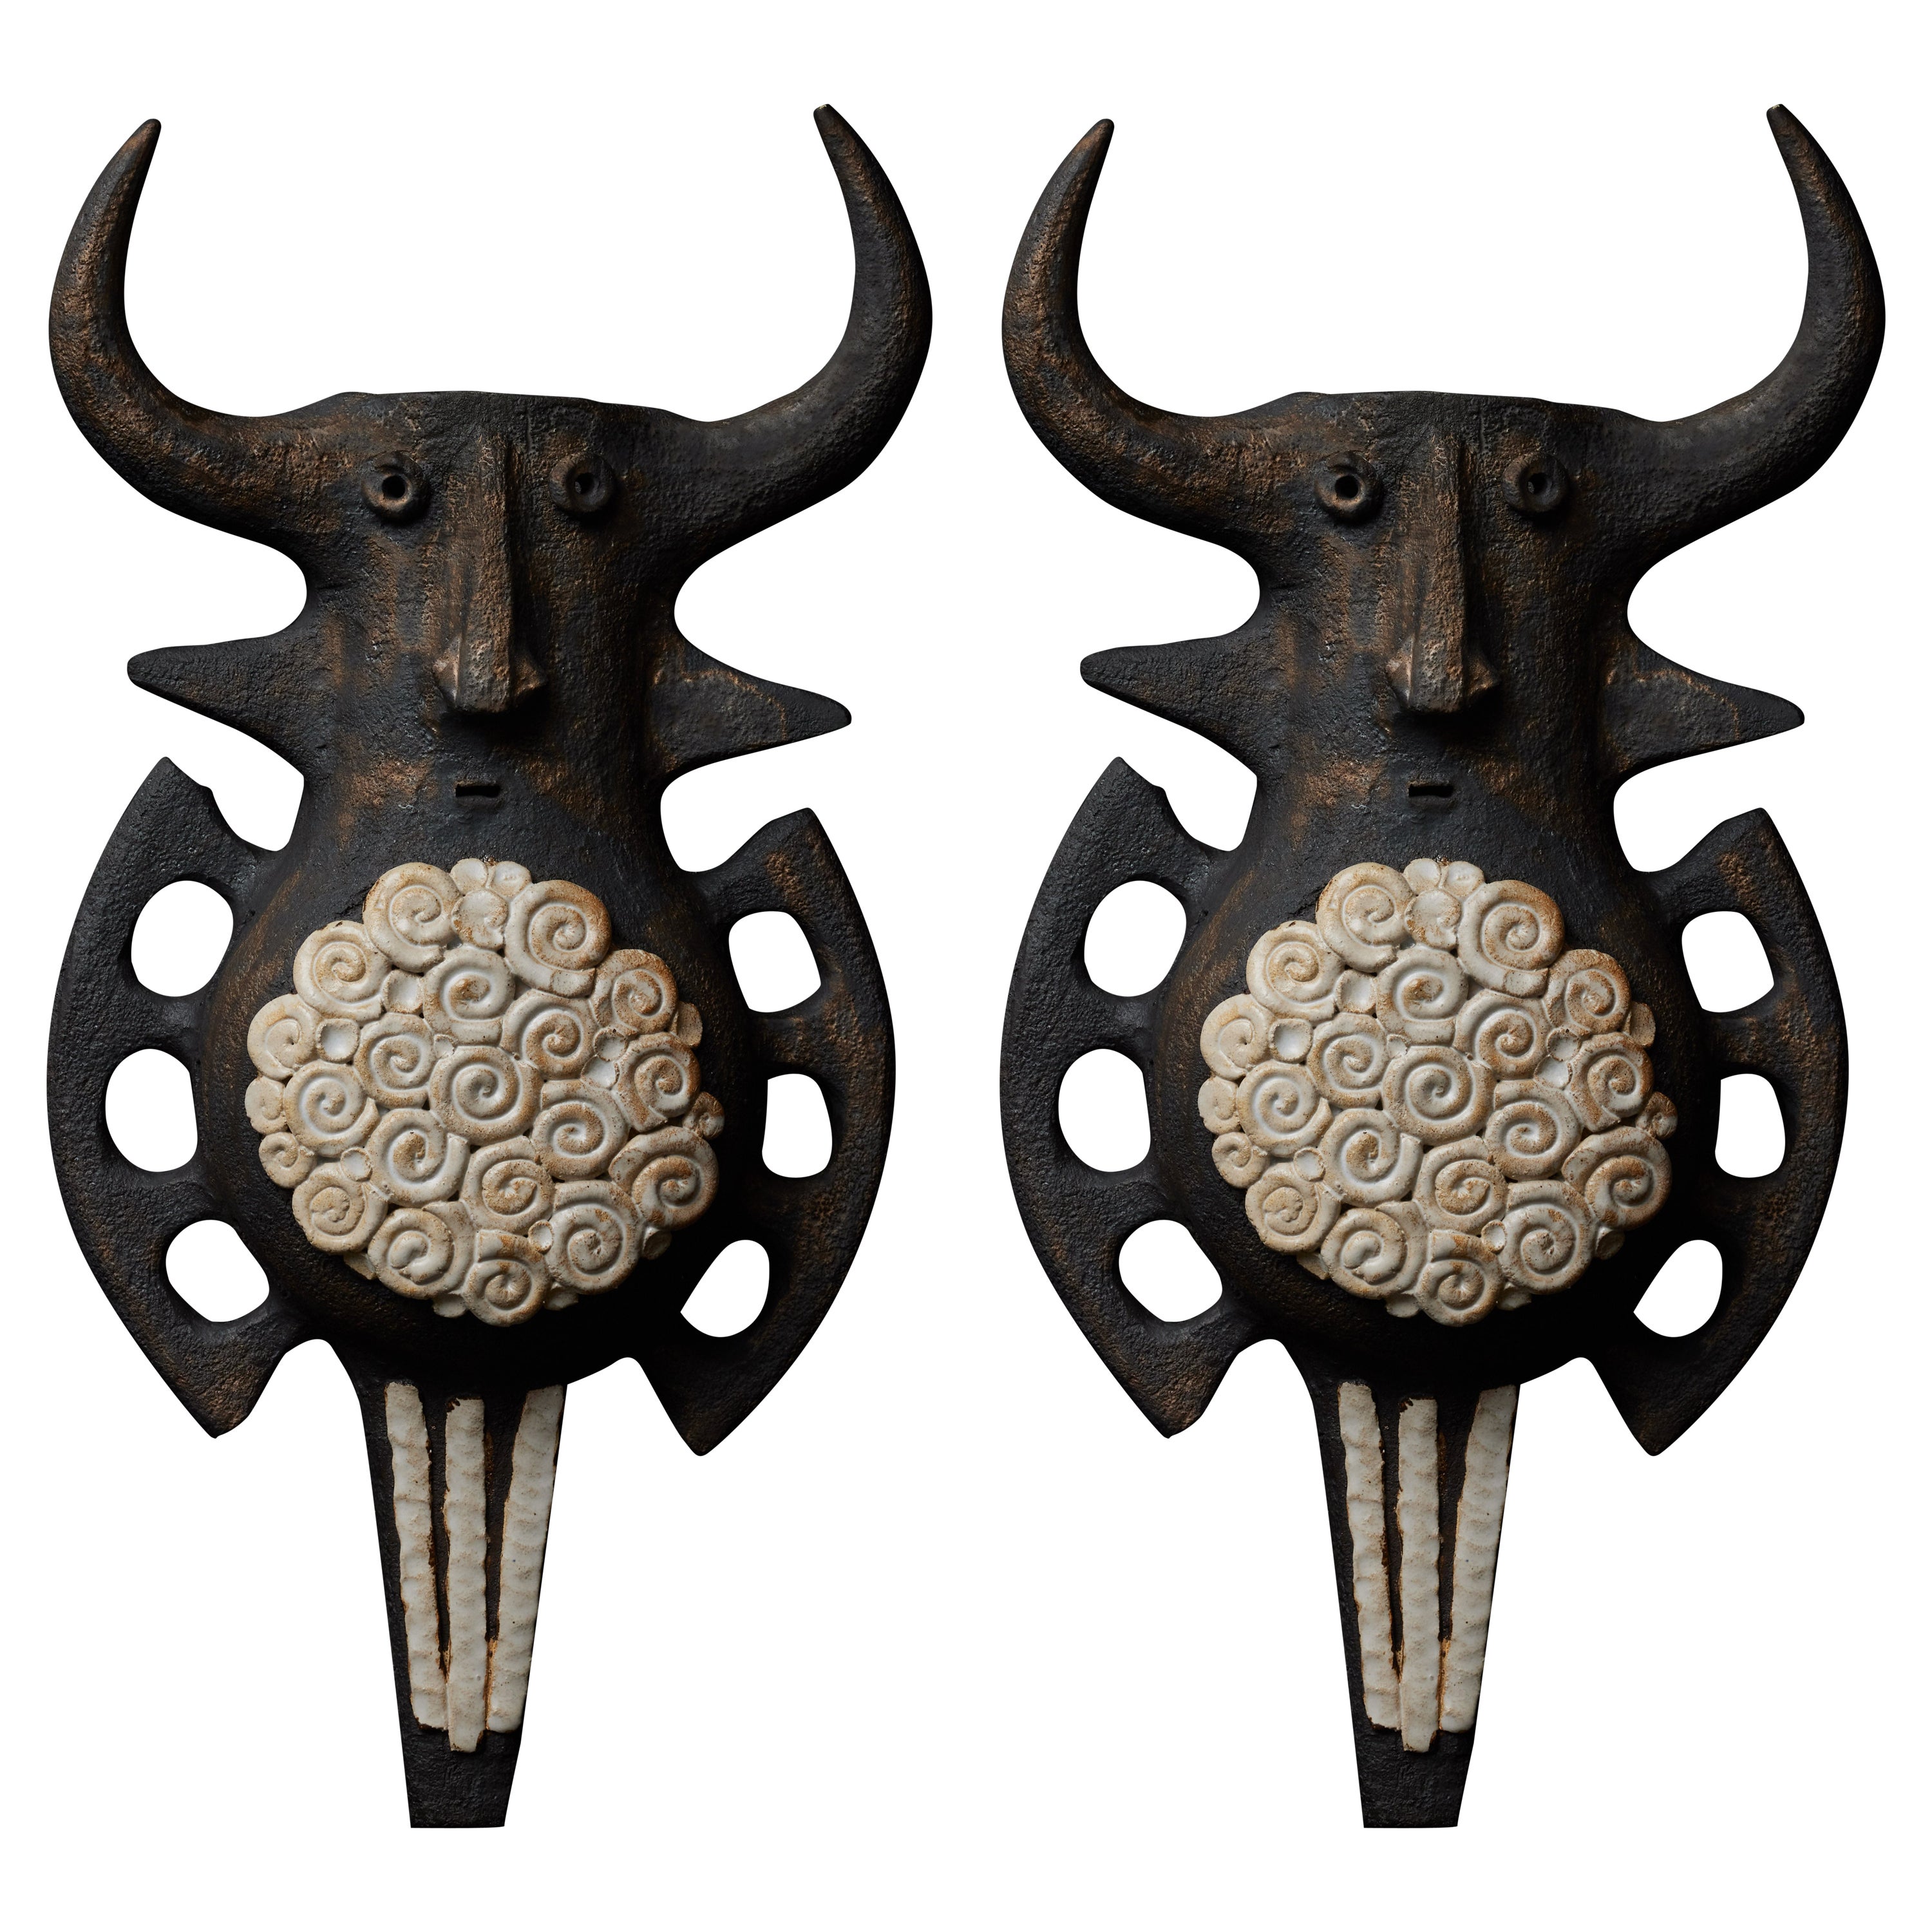 Pair of Toro Ceramic Wall Sconces by Dominique Pouchain